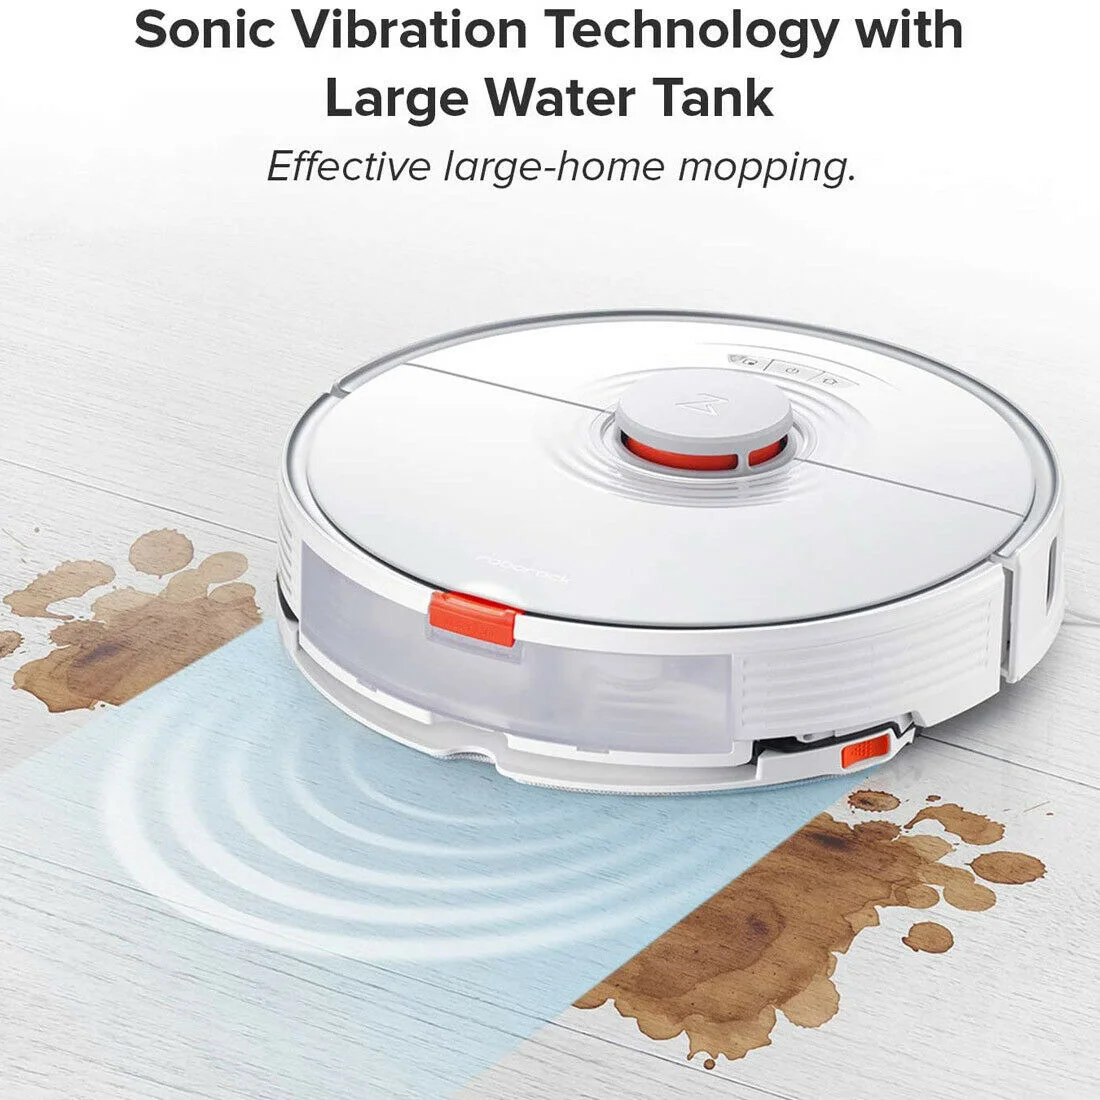 roborock s7 exhibiting it's sonic vibration technology and thereby enabling better mopping ability